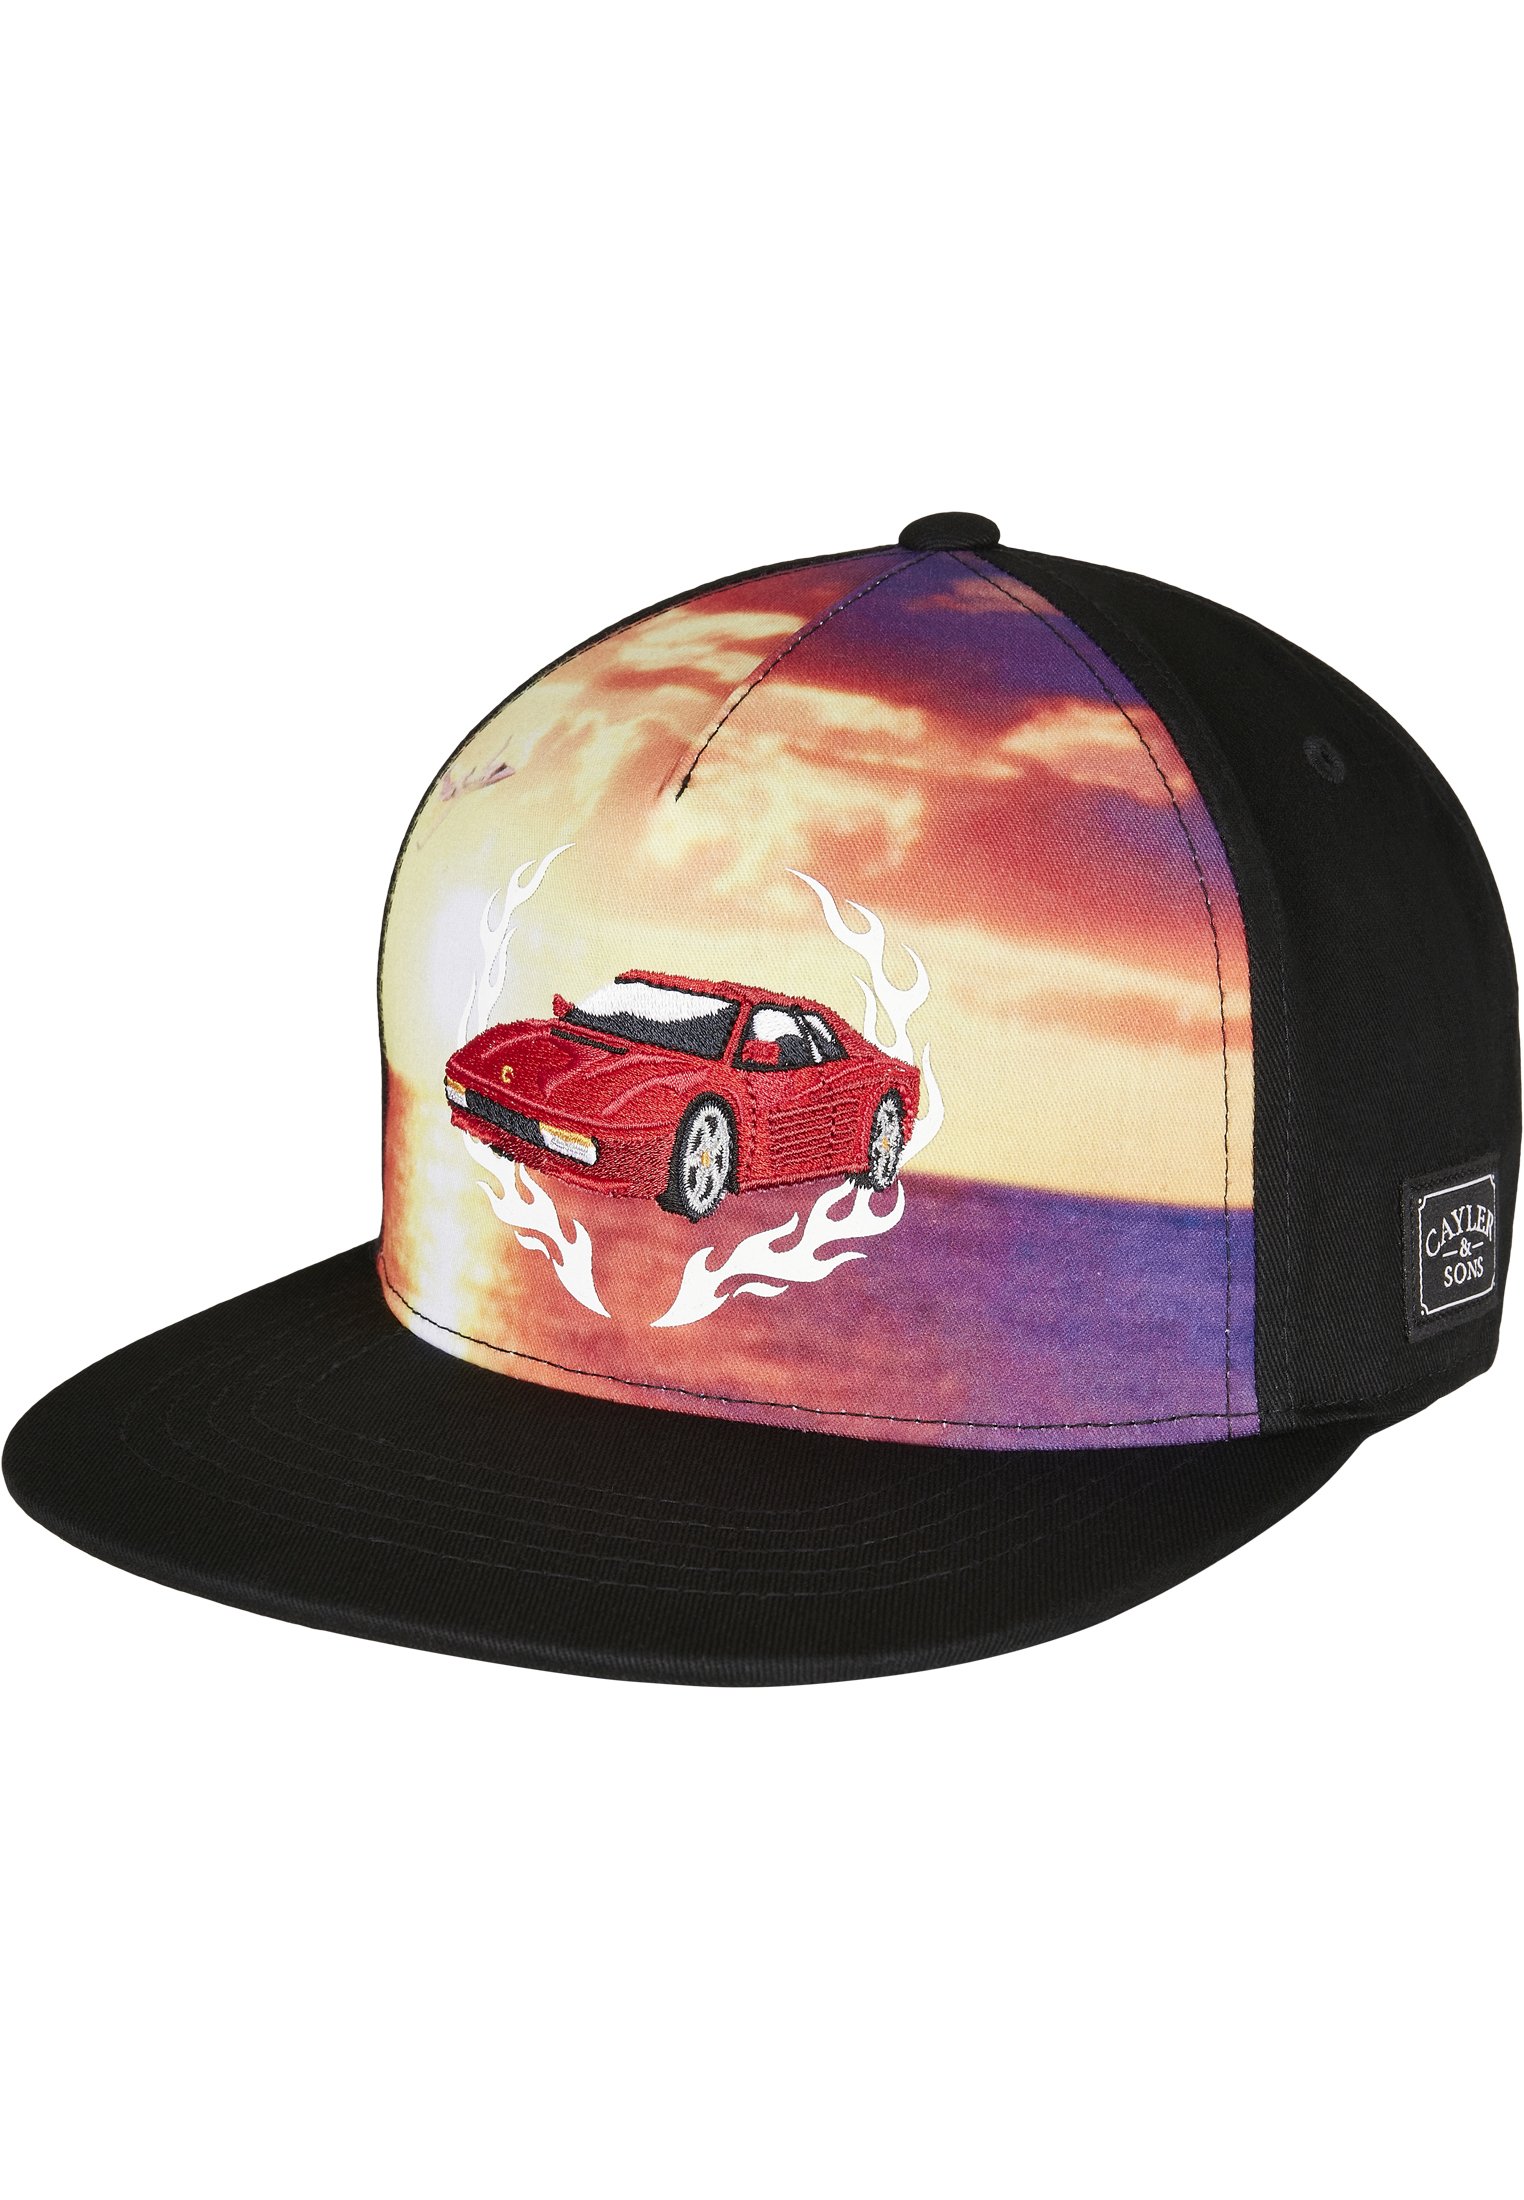 C&S WL Ride Or Fly Cap black/mc one size